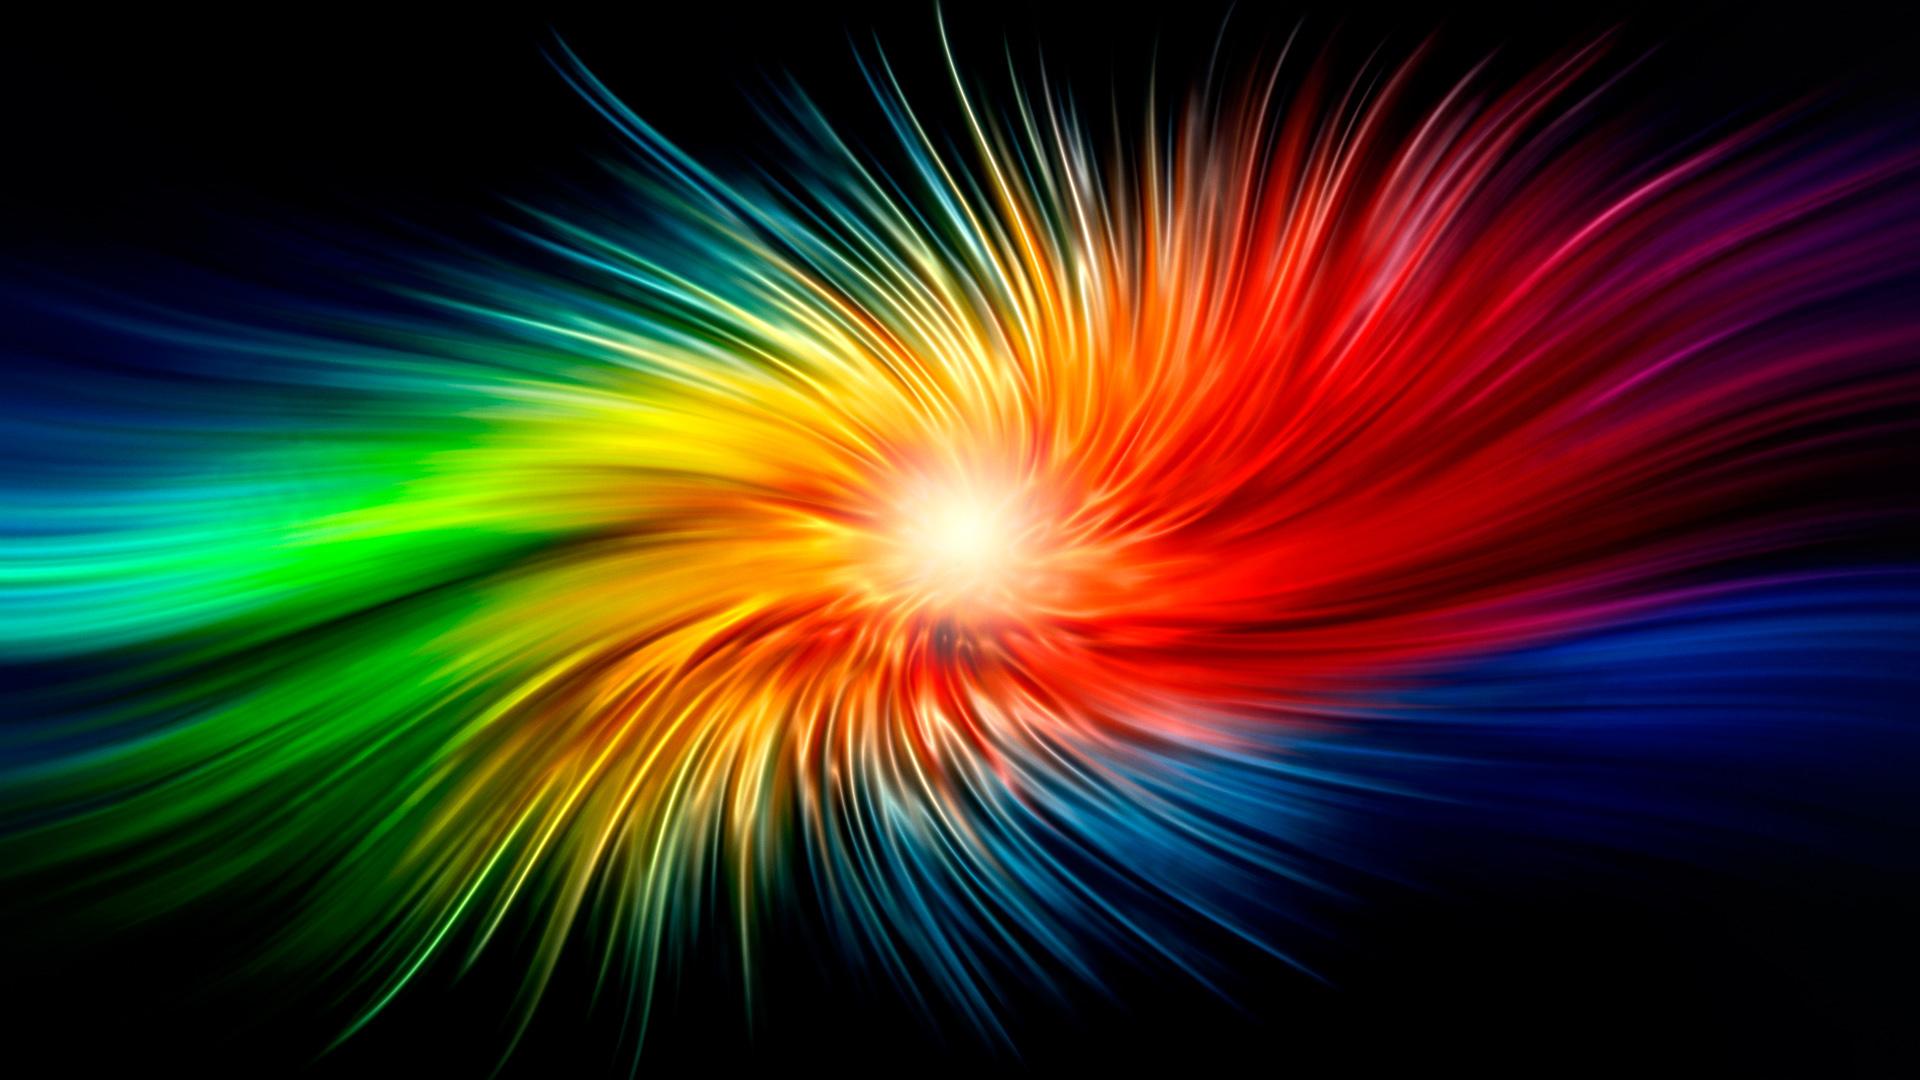 Awesome Colorful Backgrounds Hd Wallpapers in Others Imagesci